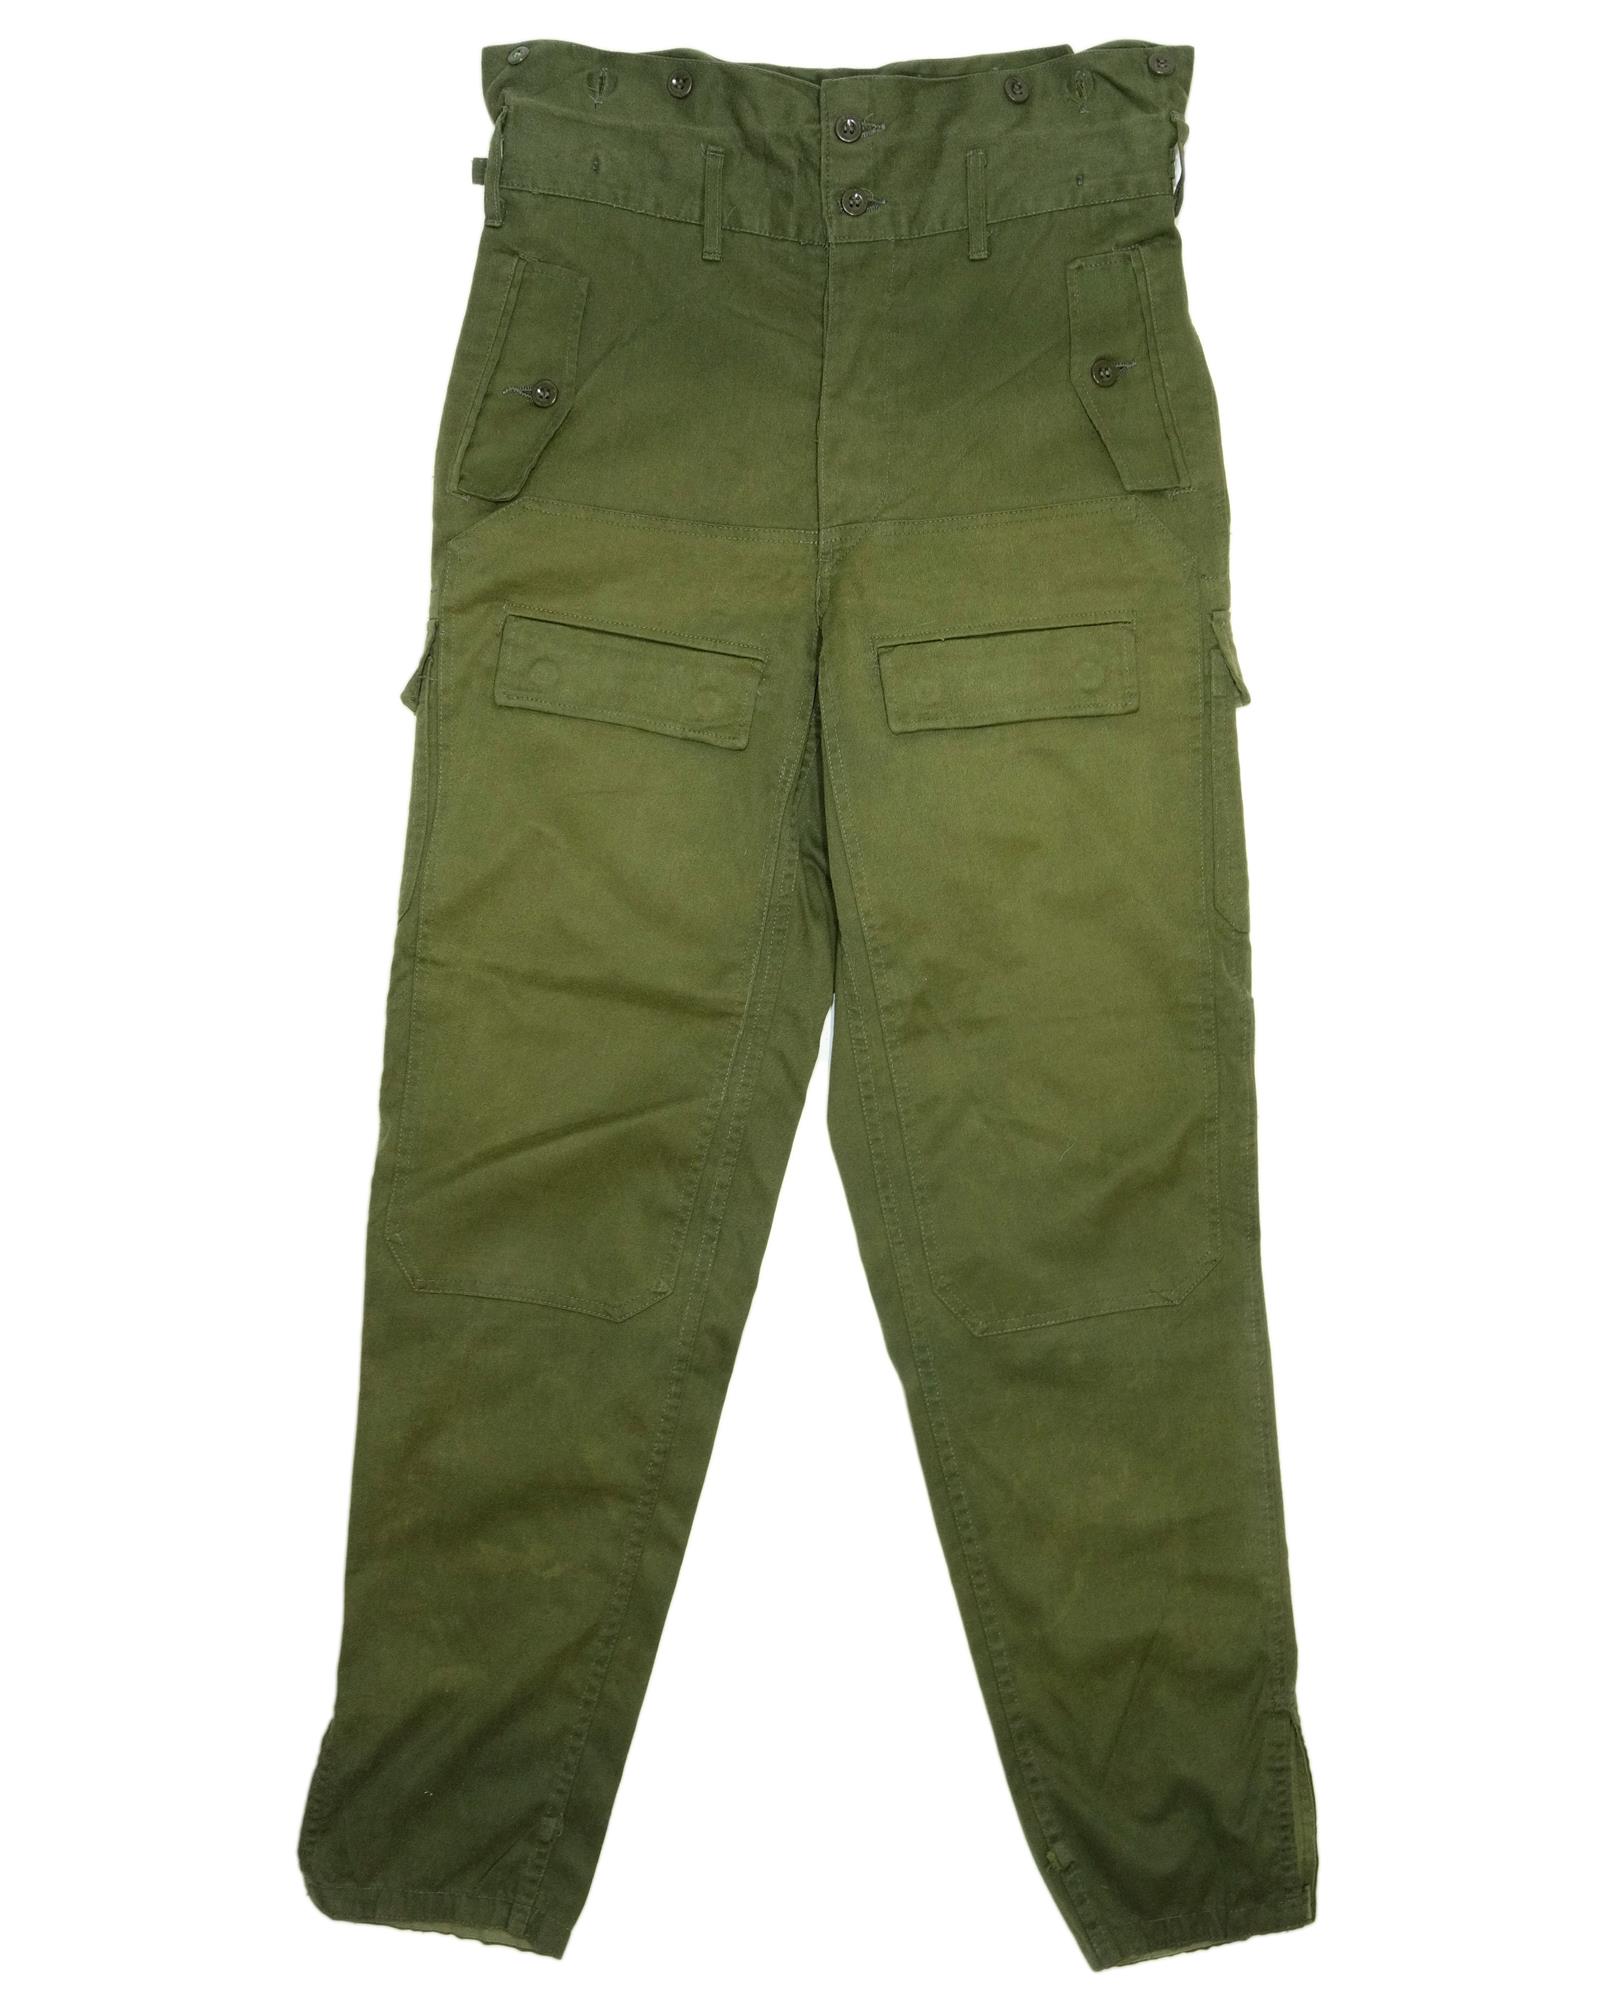 Czech military surplus olive green WOMENS M85 trousers 28" 